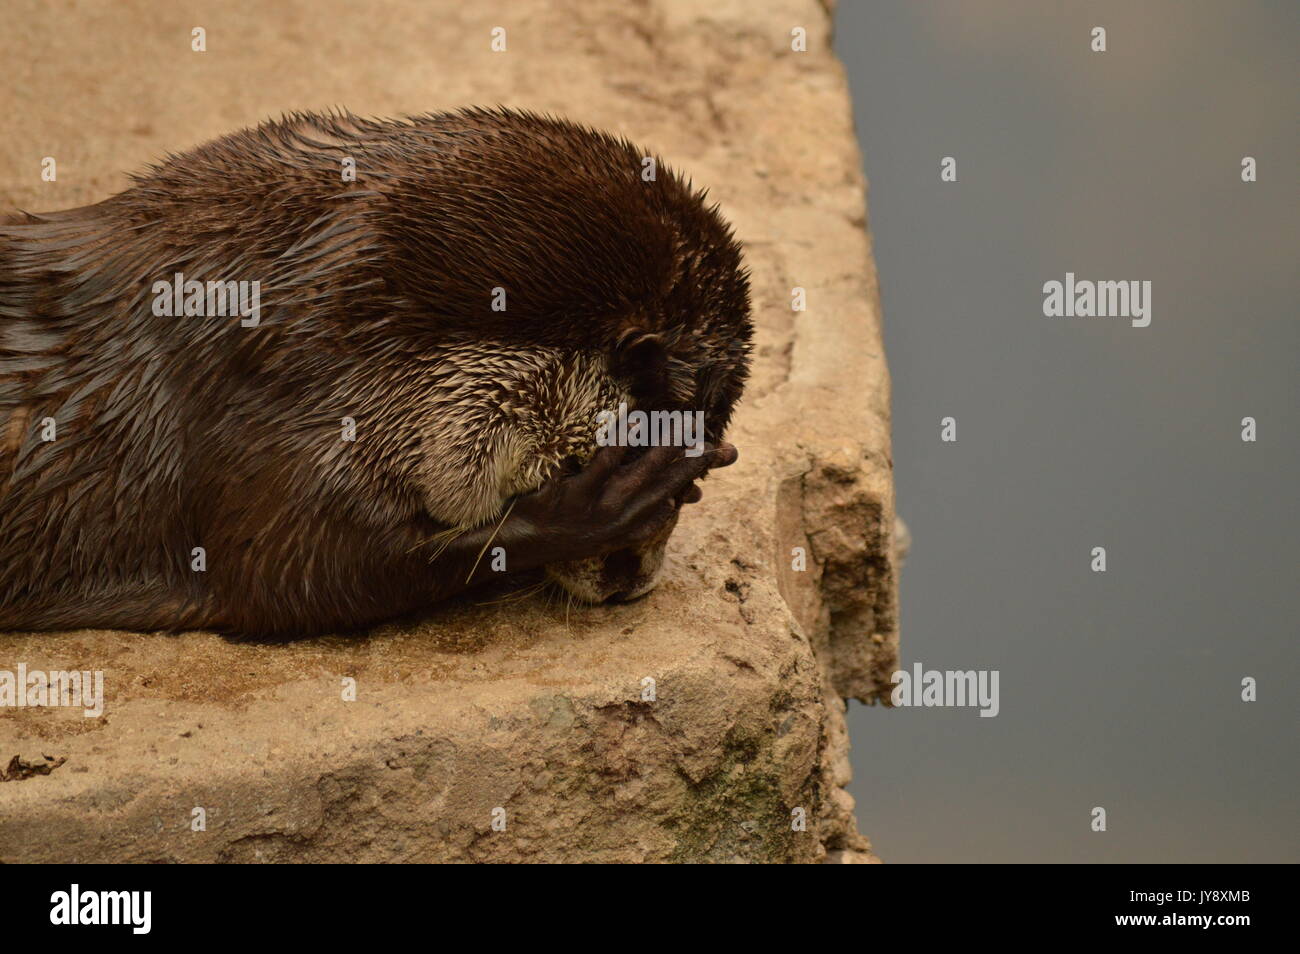 Cape Clawless Otter Stockfoto